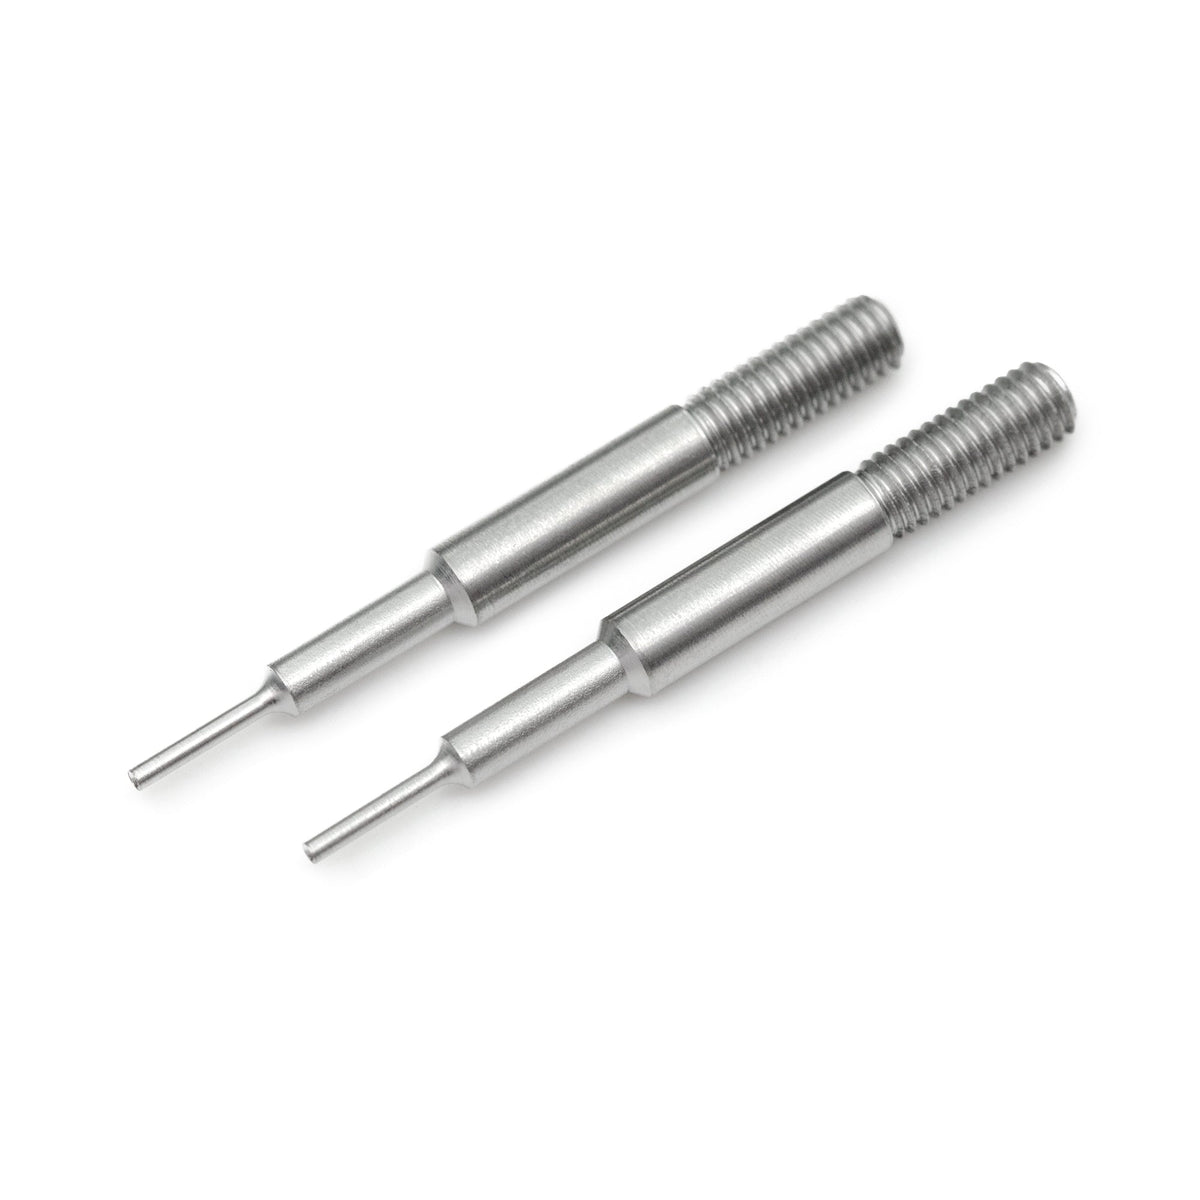 2 pieces of Changeable Push pins 0.80mm (for Swiss Bergeon 6767-F spring bar tool)